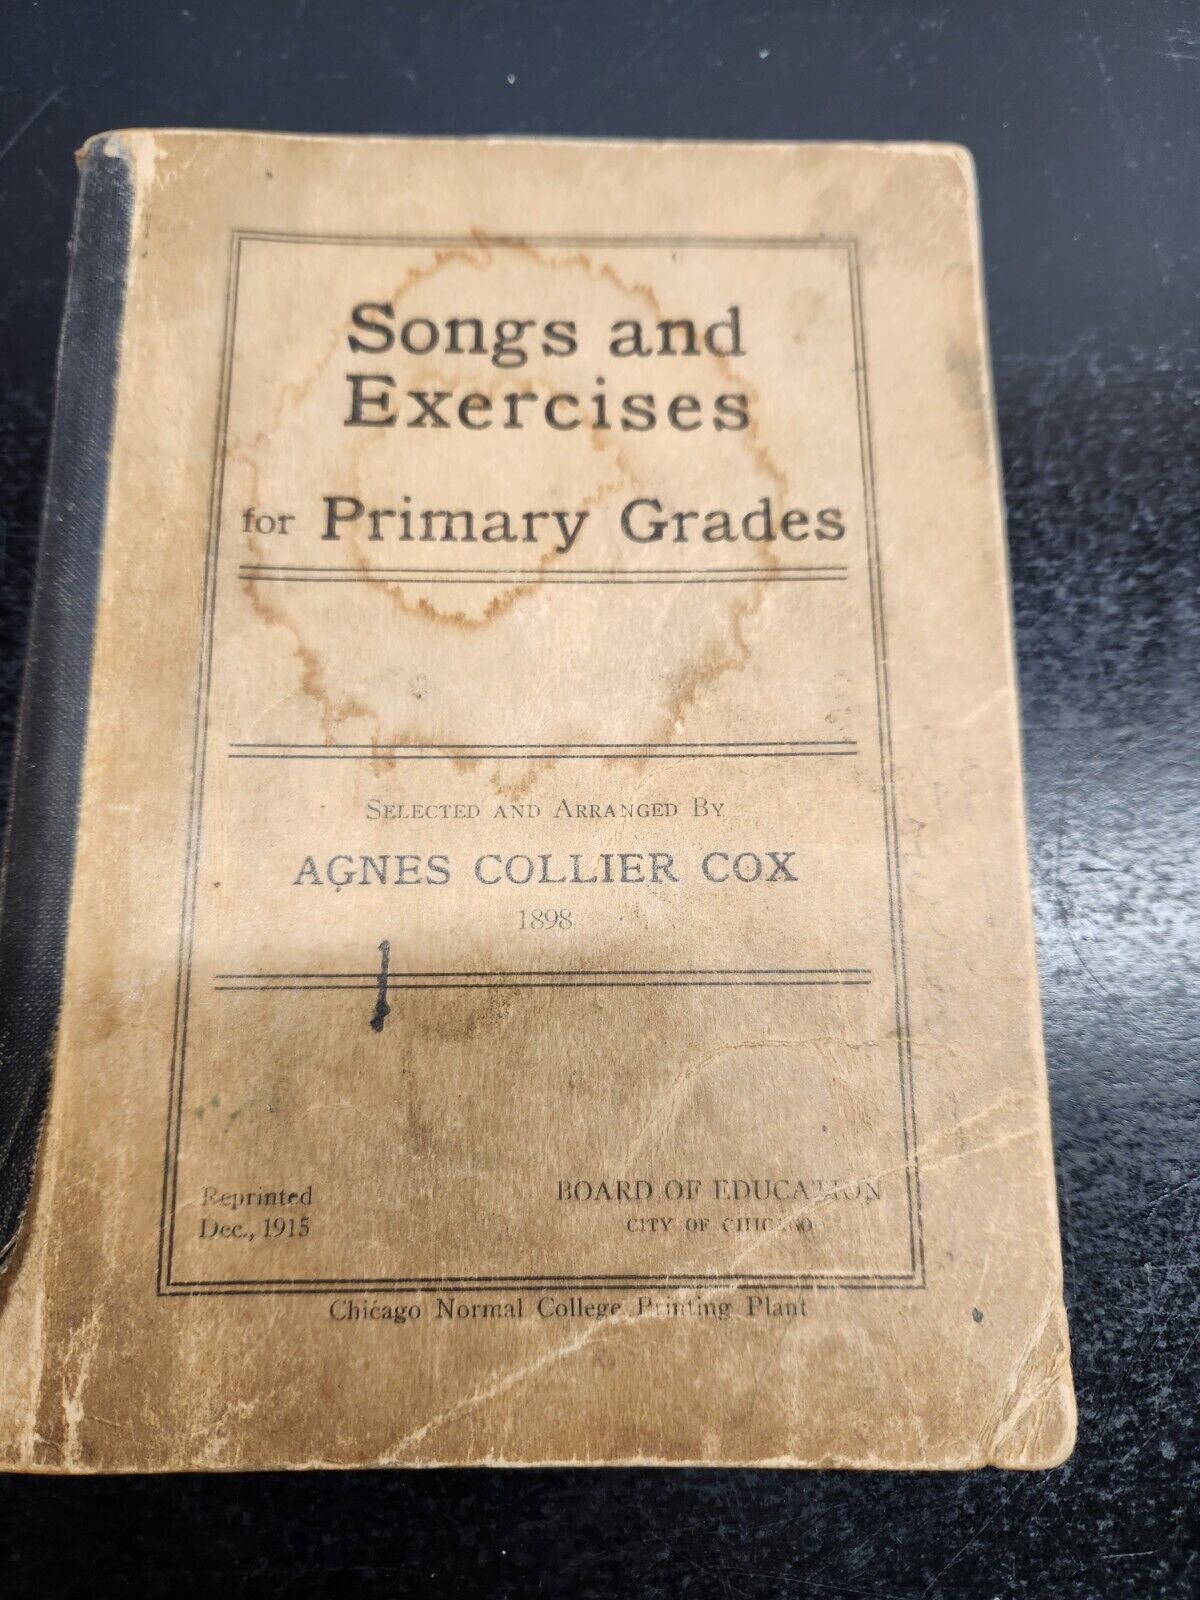 1915 Chicago Public Schools Songs and Exercises for Primary Grades booklet